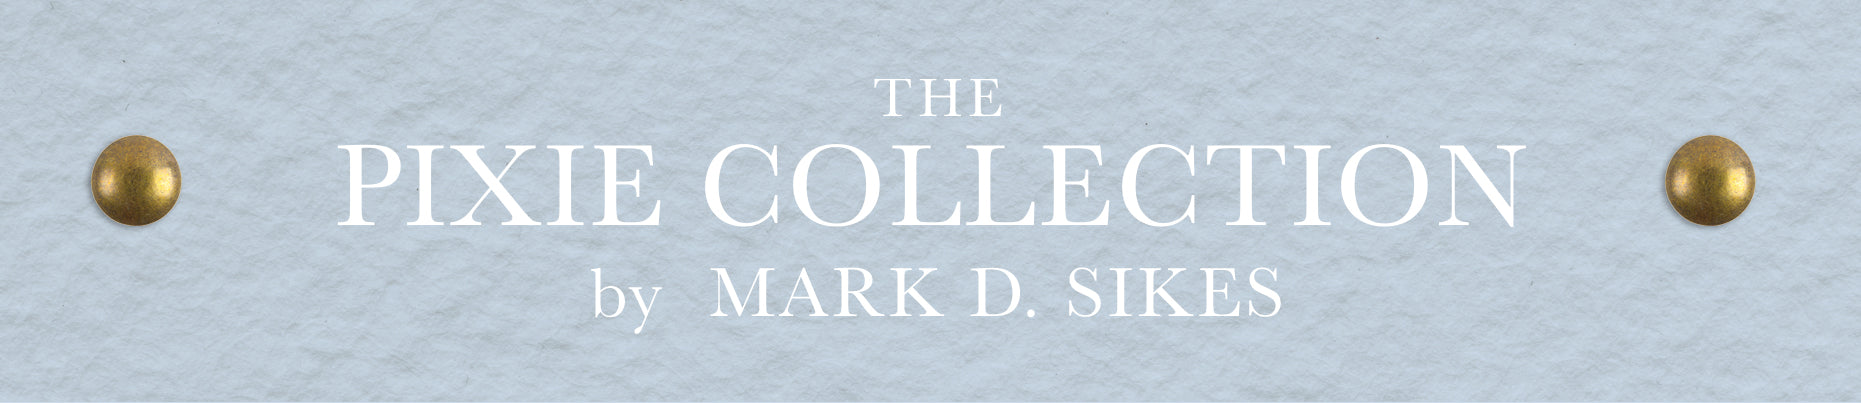 The Pixie Collection by Mark D. Sikes